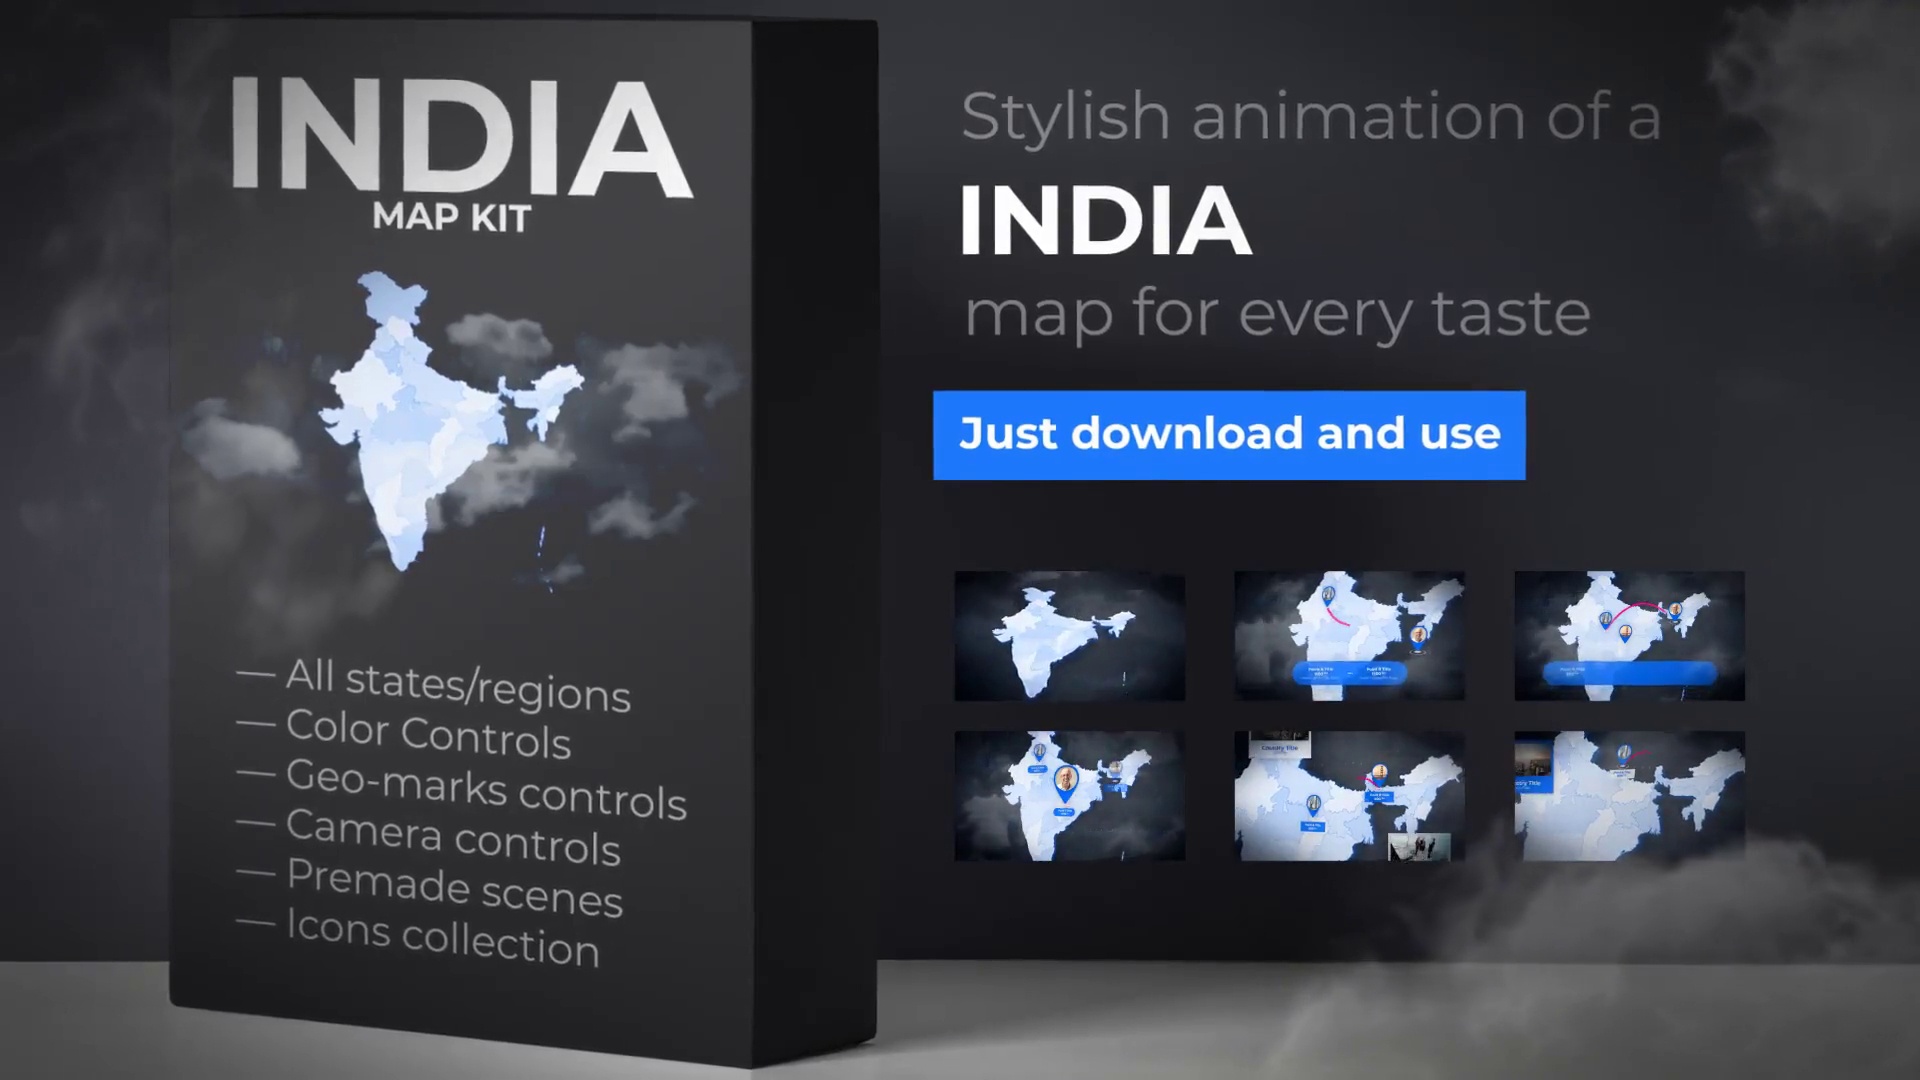 3 Top After Effects Video Templates for India